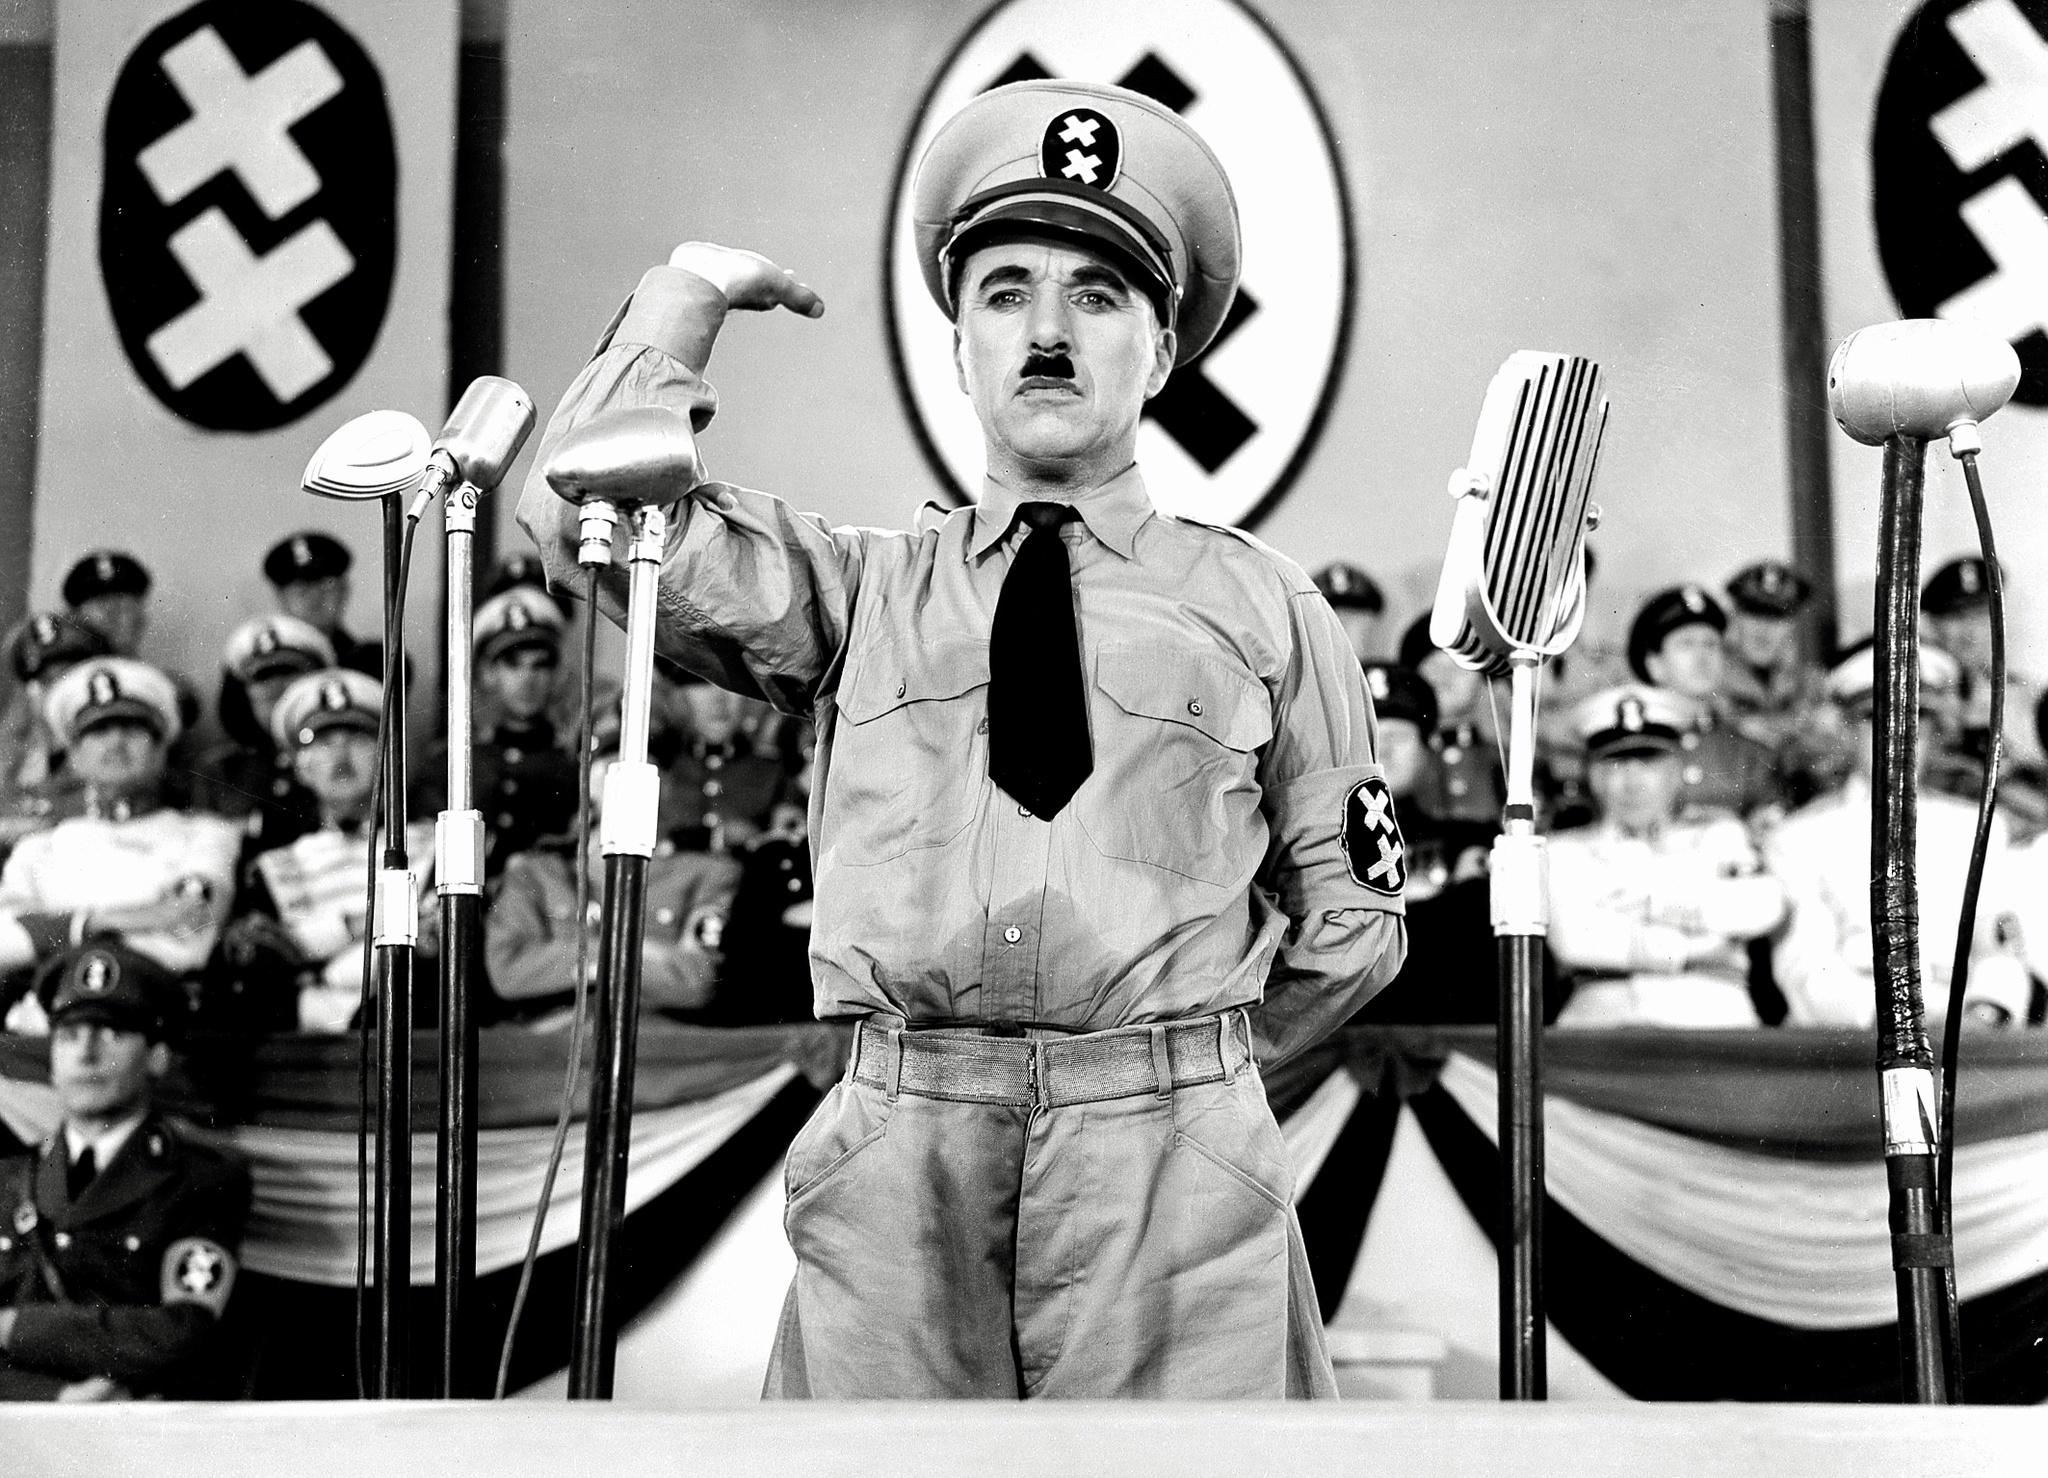 The Great Dictator #2